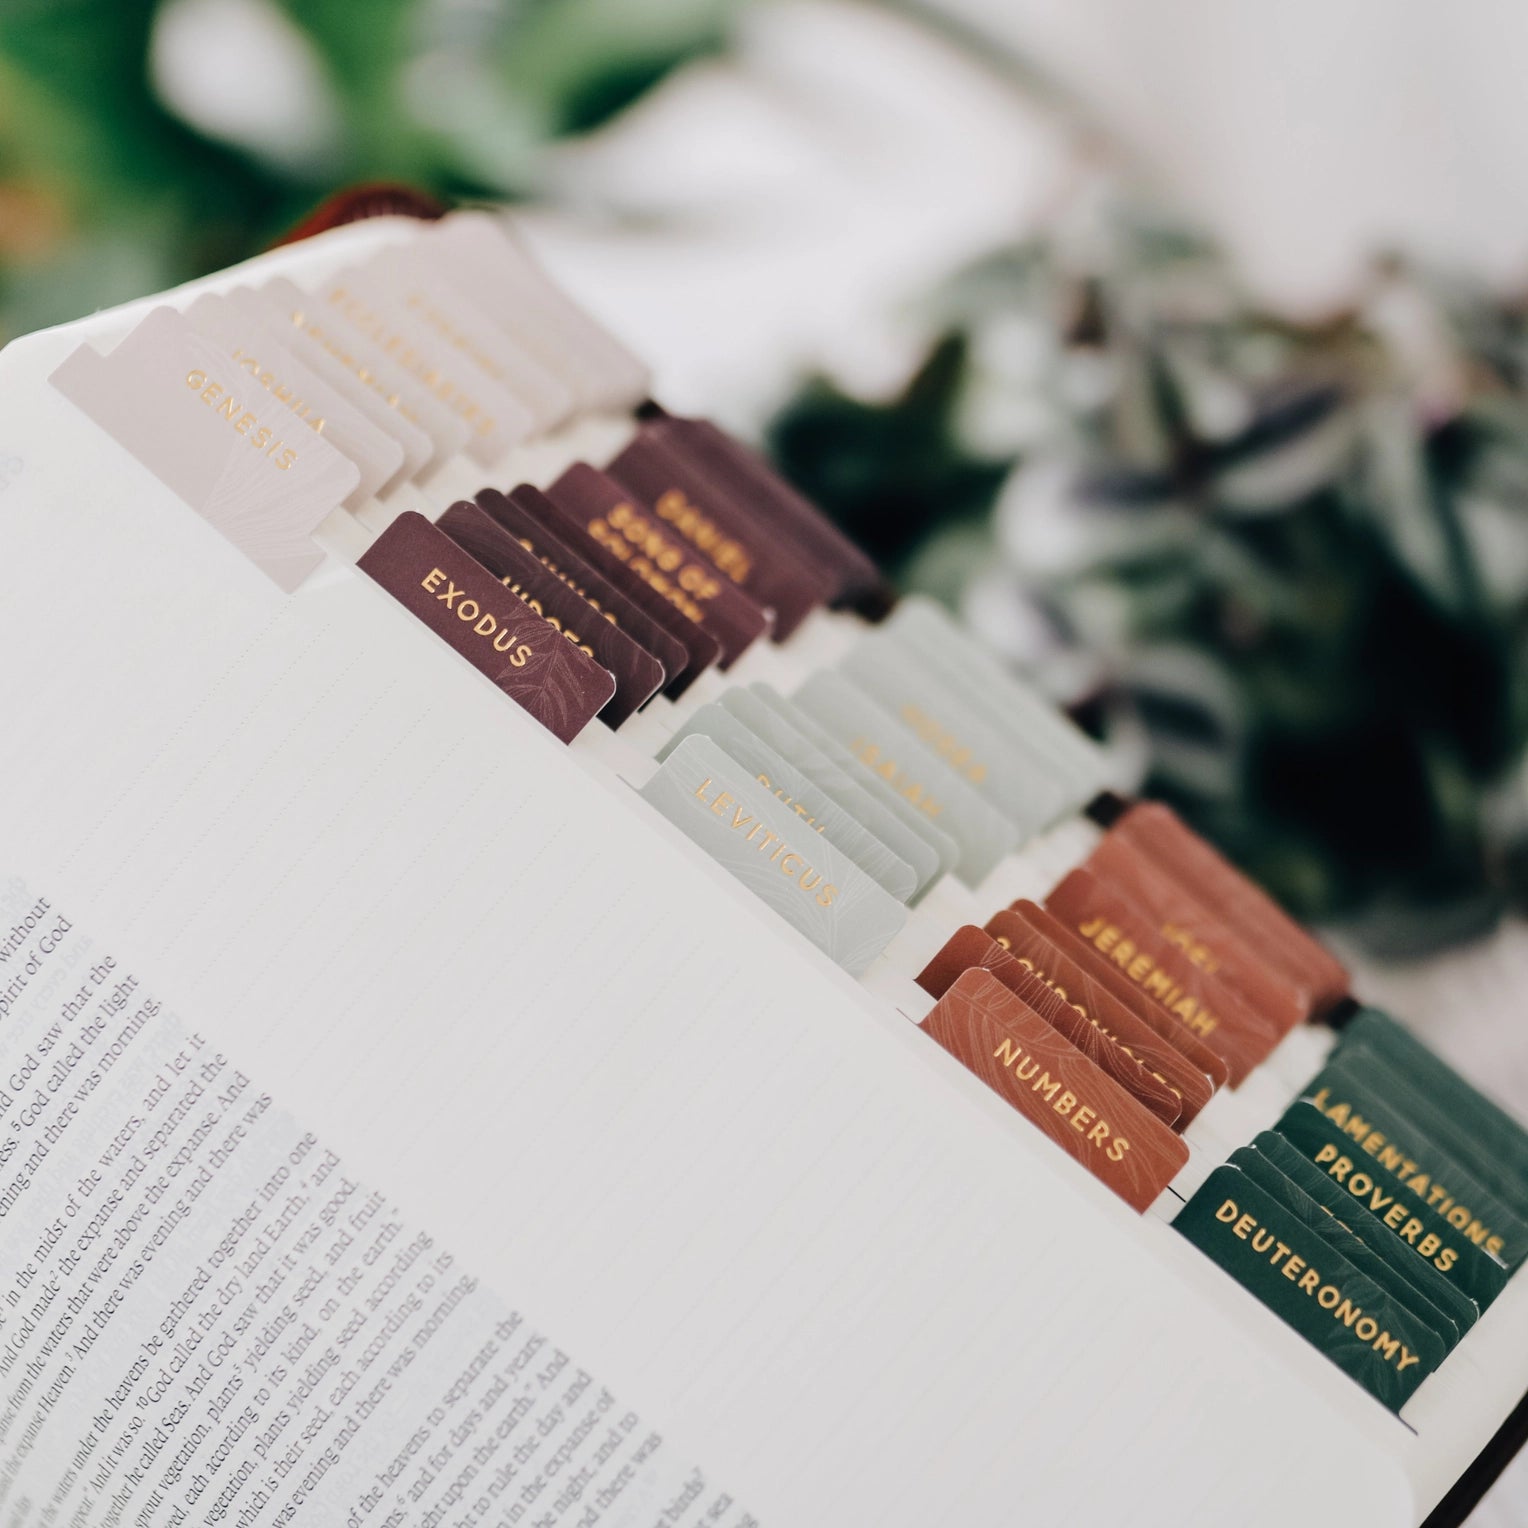 These beautifully decorative and vibrant books of the bible tabs are self-adhesive, making it easy to navigate your Bible during your bible journaling and Bible Studies. Available in several colors at BBB Supplies Craft Shop. 